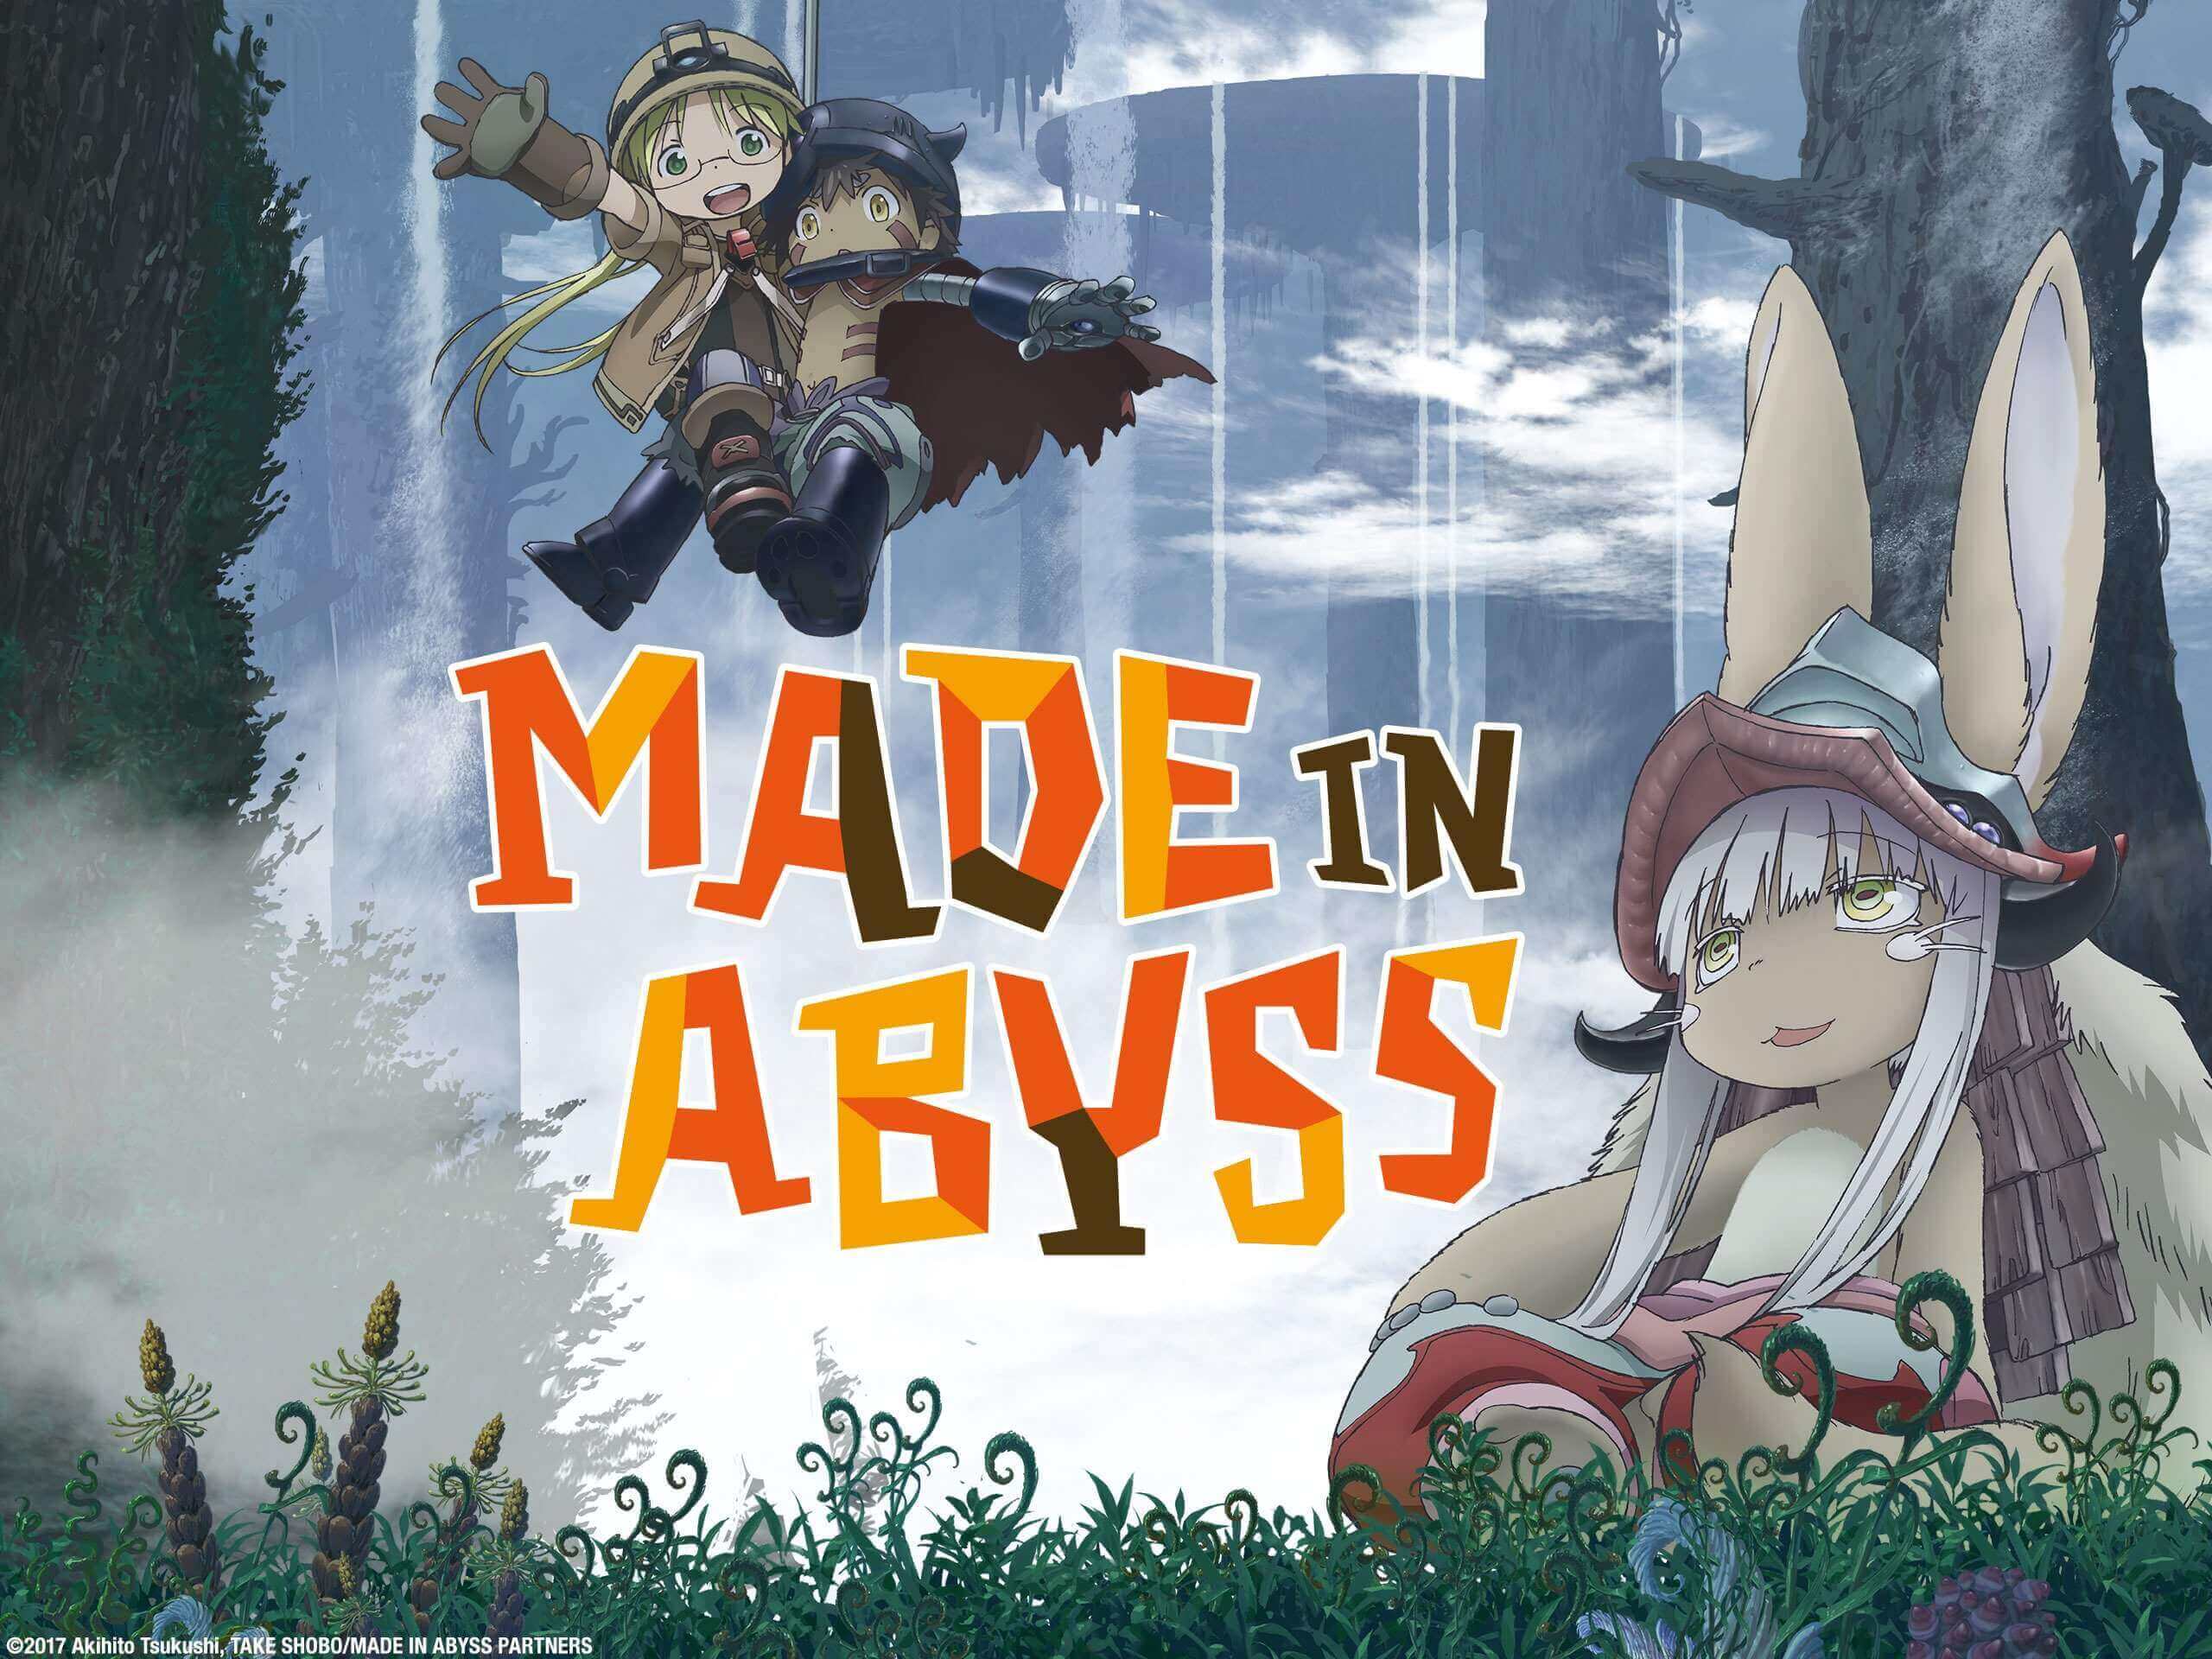 Made in Abyss BD Batch Subtitle Indonesia